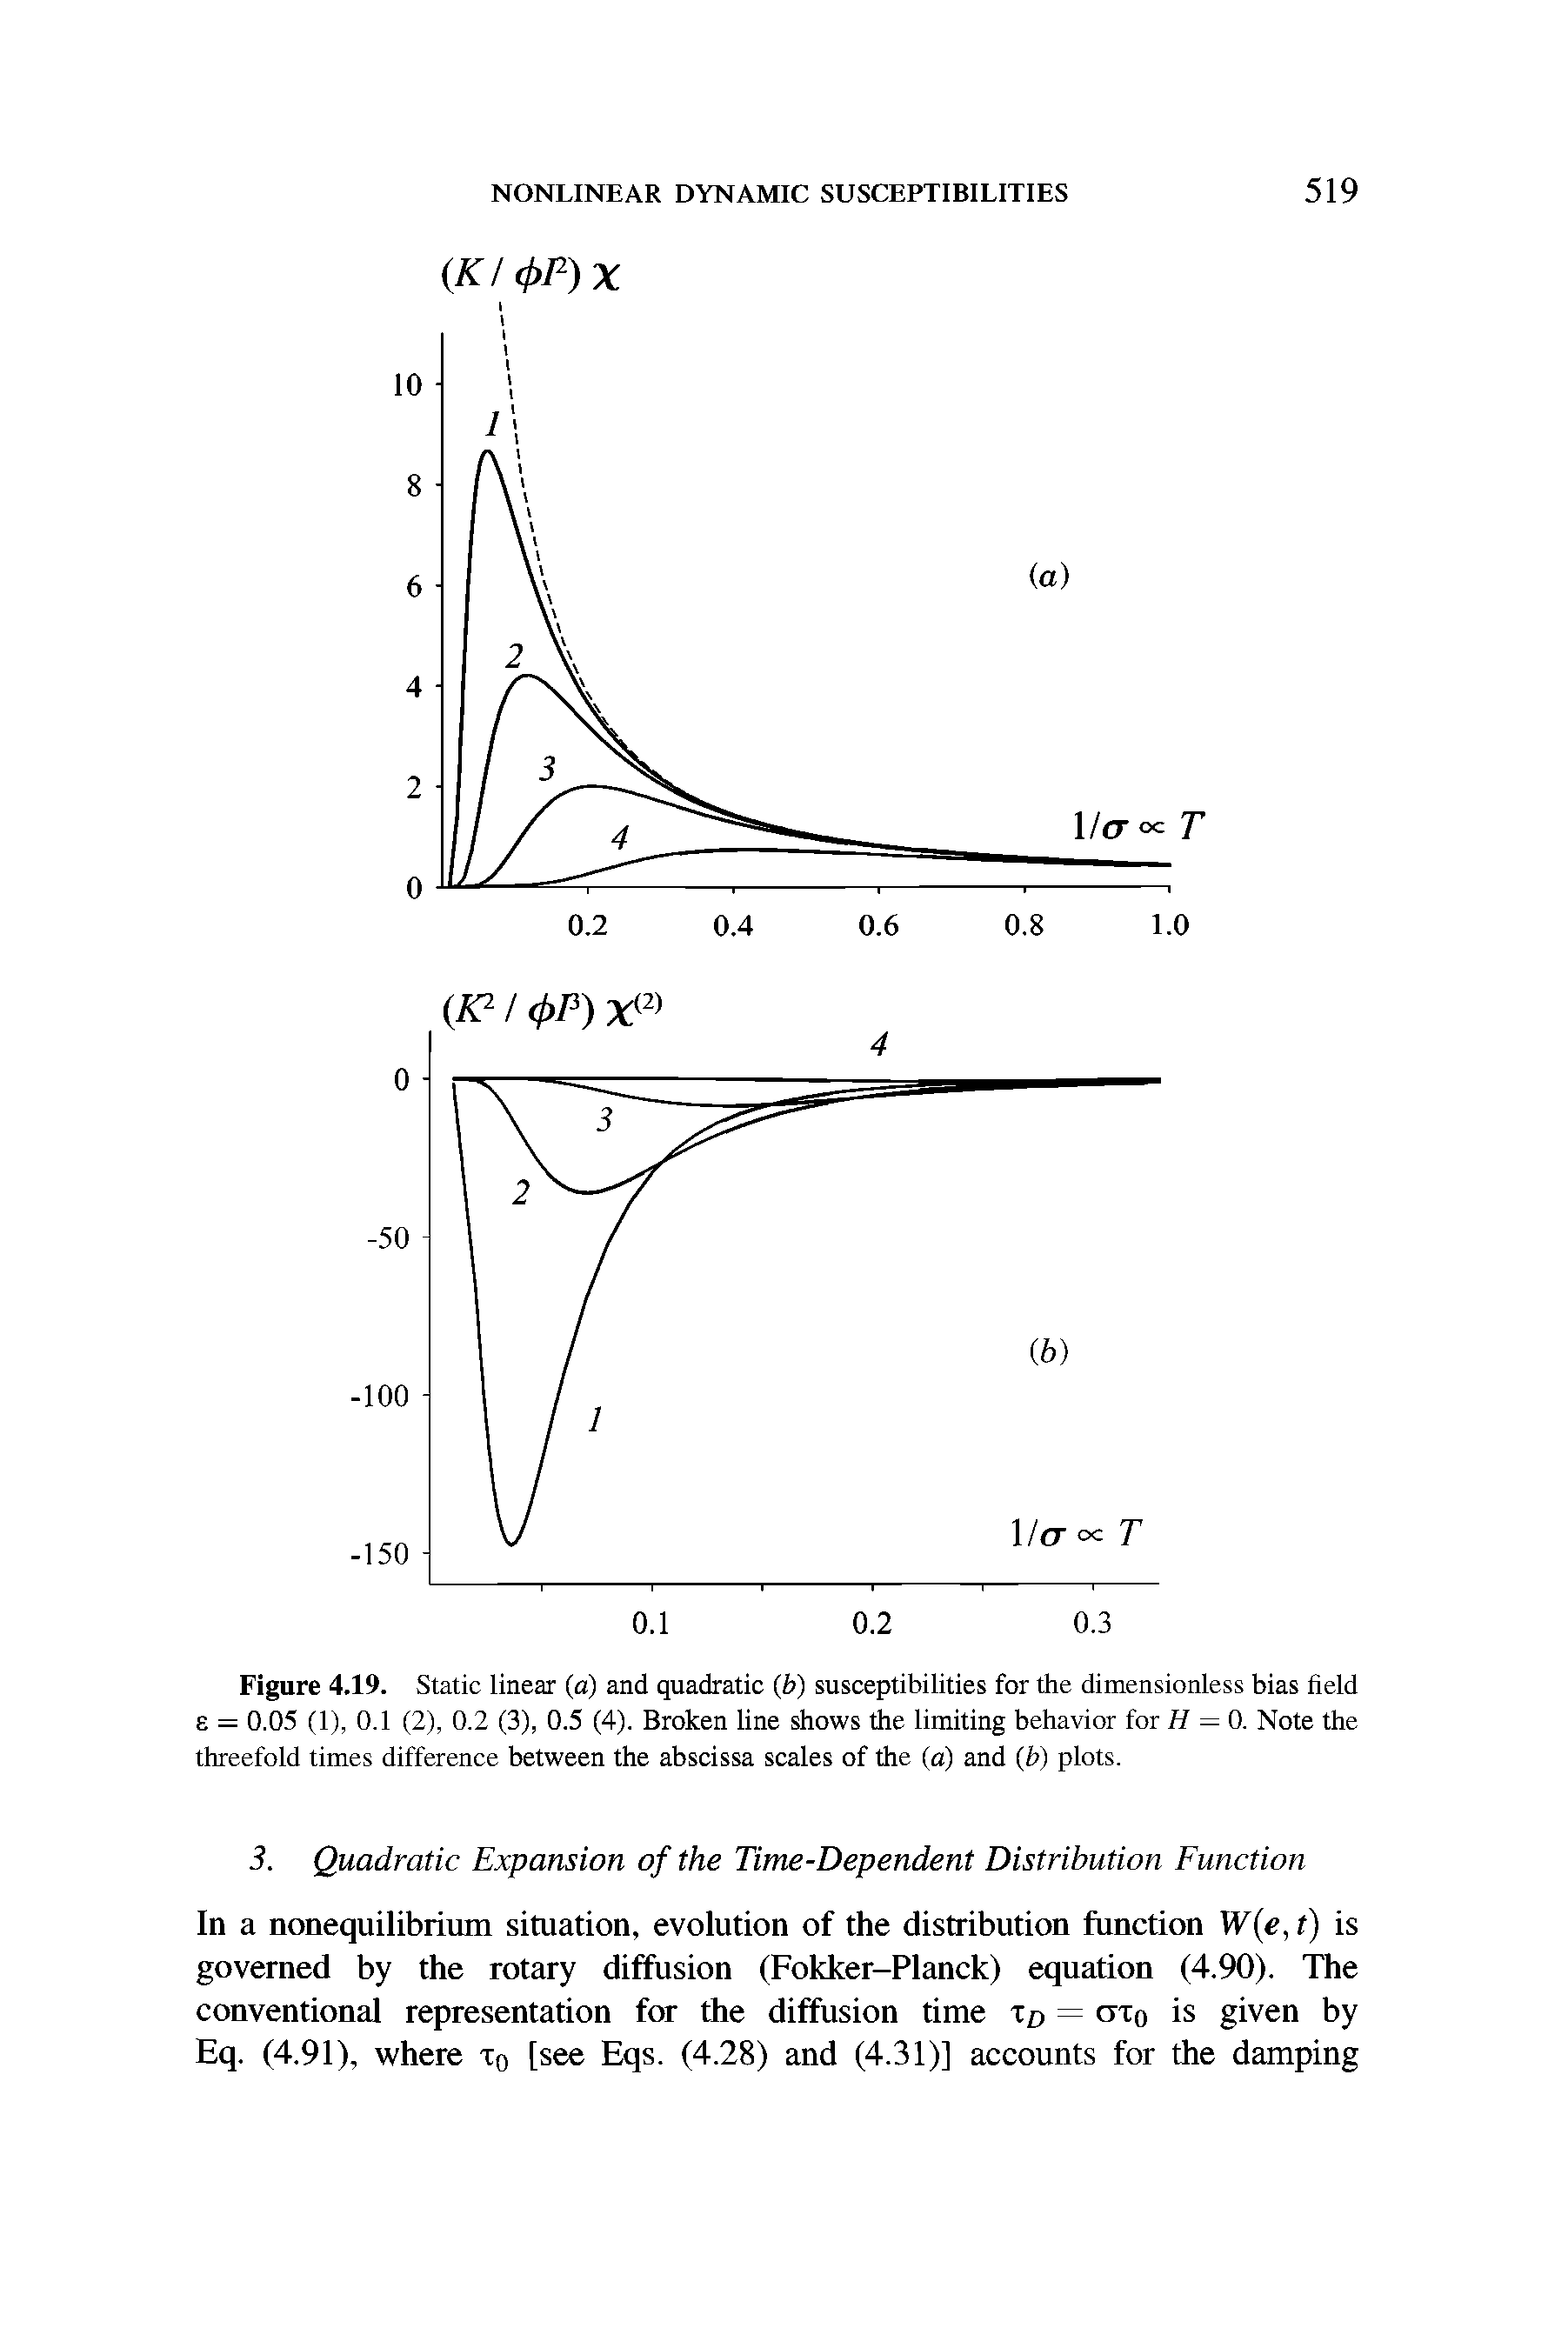 Figure 4.19. Static linear (a) and quadratic (b) susceptibilities for the dimensionless bias field E = 0.05 (1), 0.1 (2), 0.2 (3), 0.5 (4). Broken line shows the limiting behavior for H = 0. Note the threefold times difference between the abscissa scales of the (a) and (b) plots.